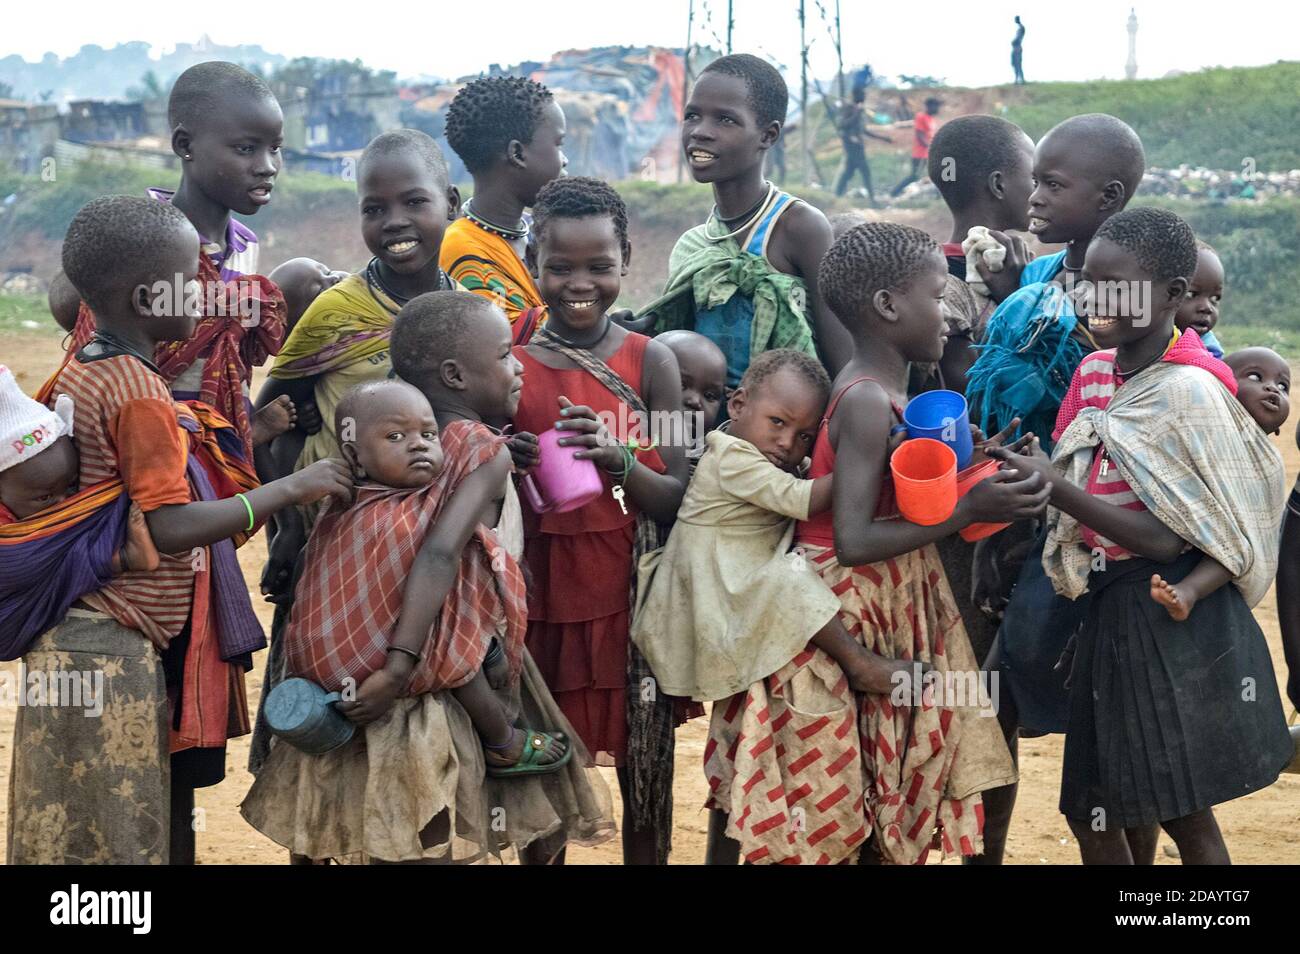 Older children from Kisenyi, an area of Kampala, Uganda, care for and carry younger siblings. Stock Photo